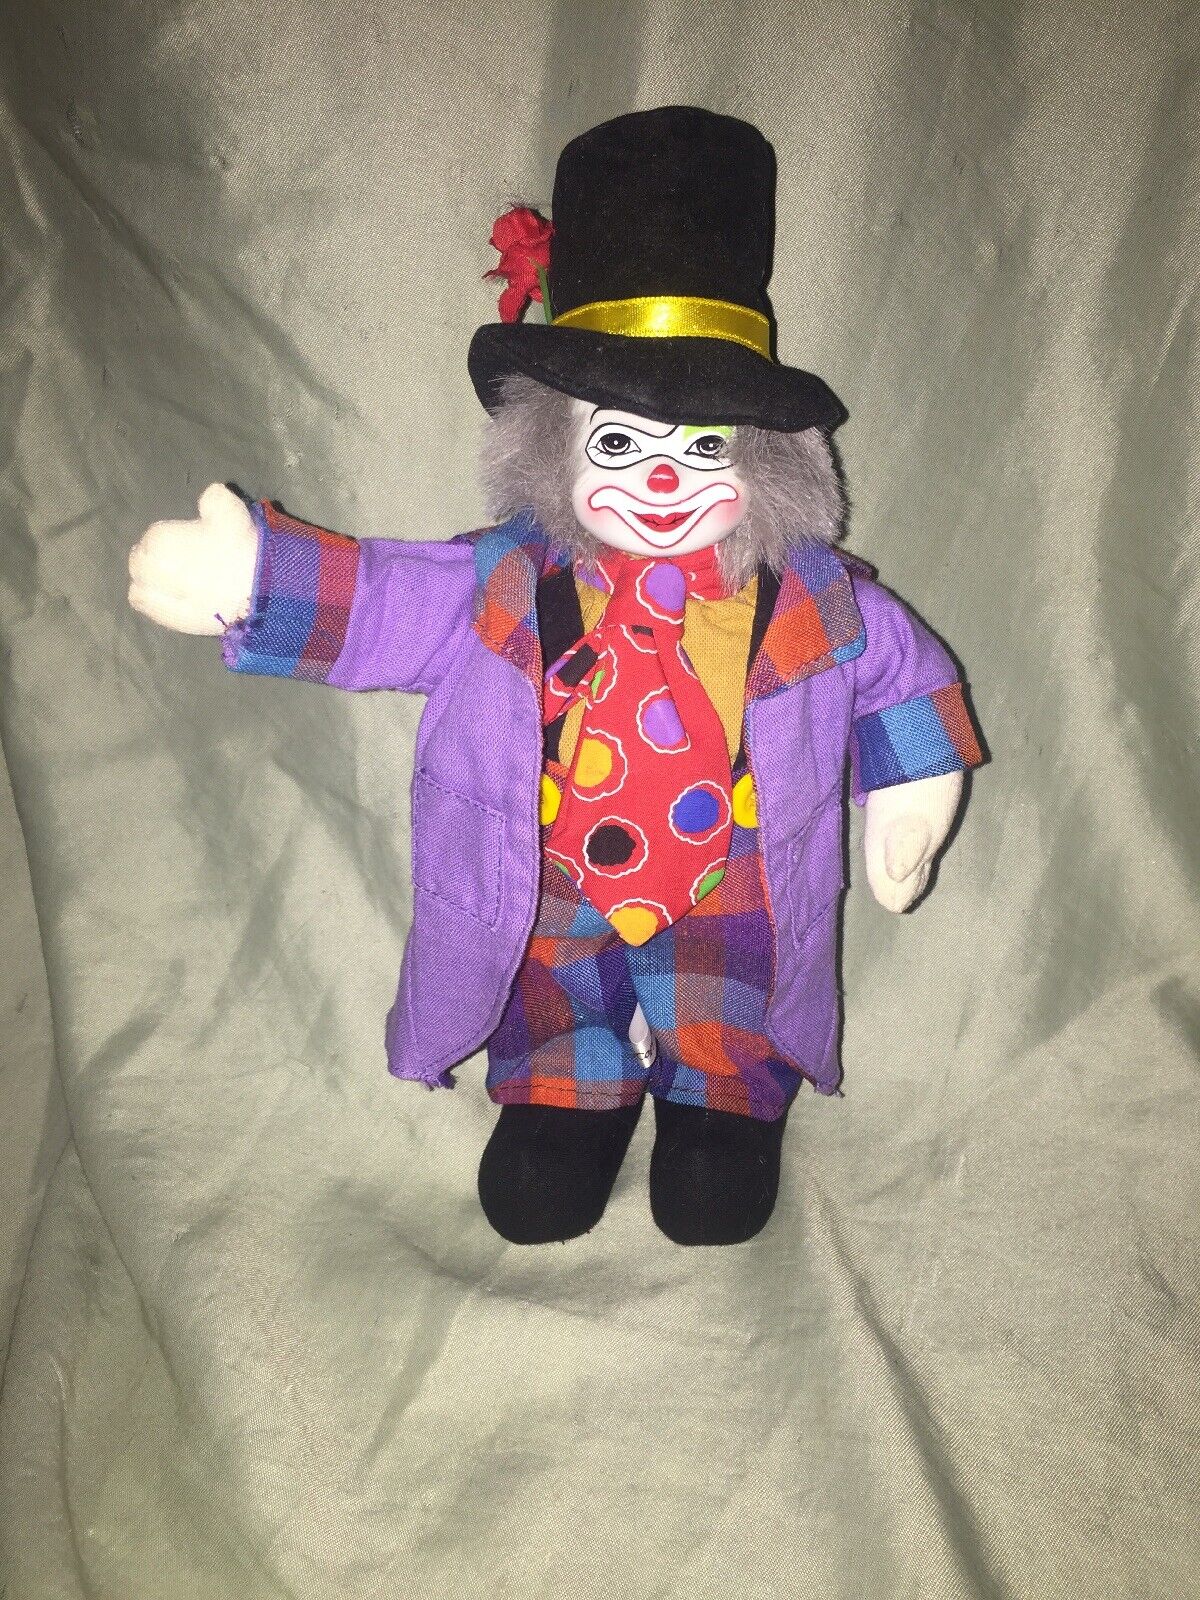 Circus Clown Rag Doll with Ceramic/Porcelain Painted Face and Purple Outfit 10”